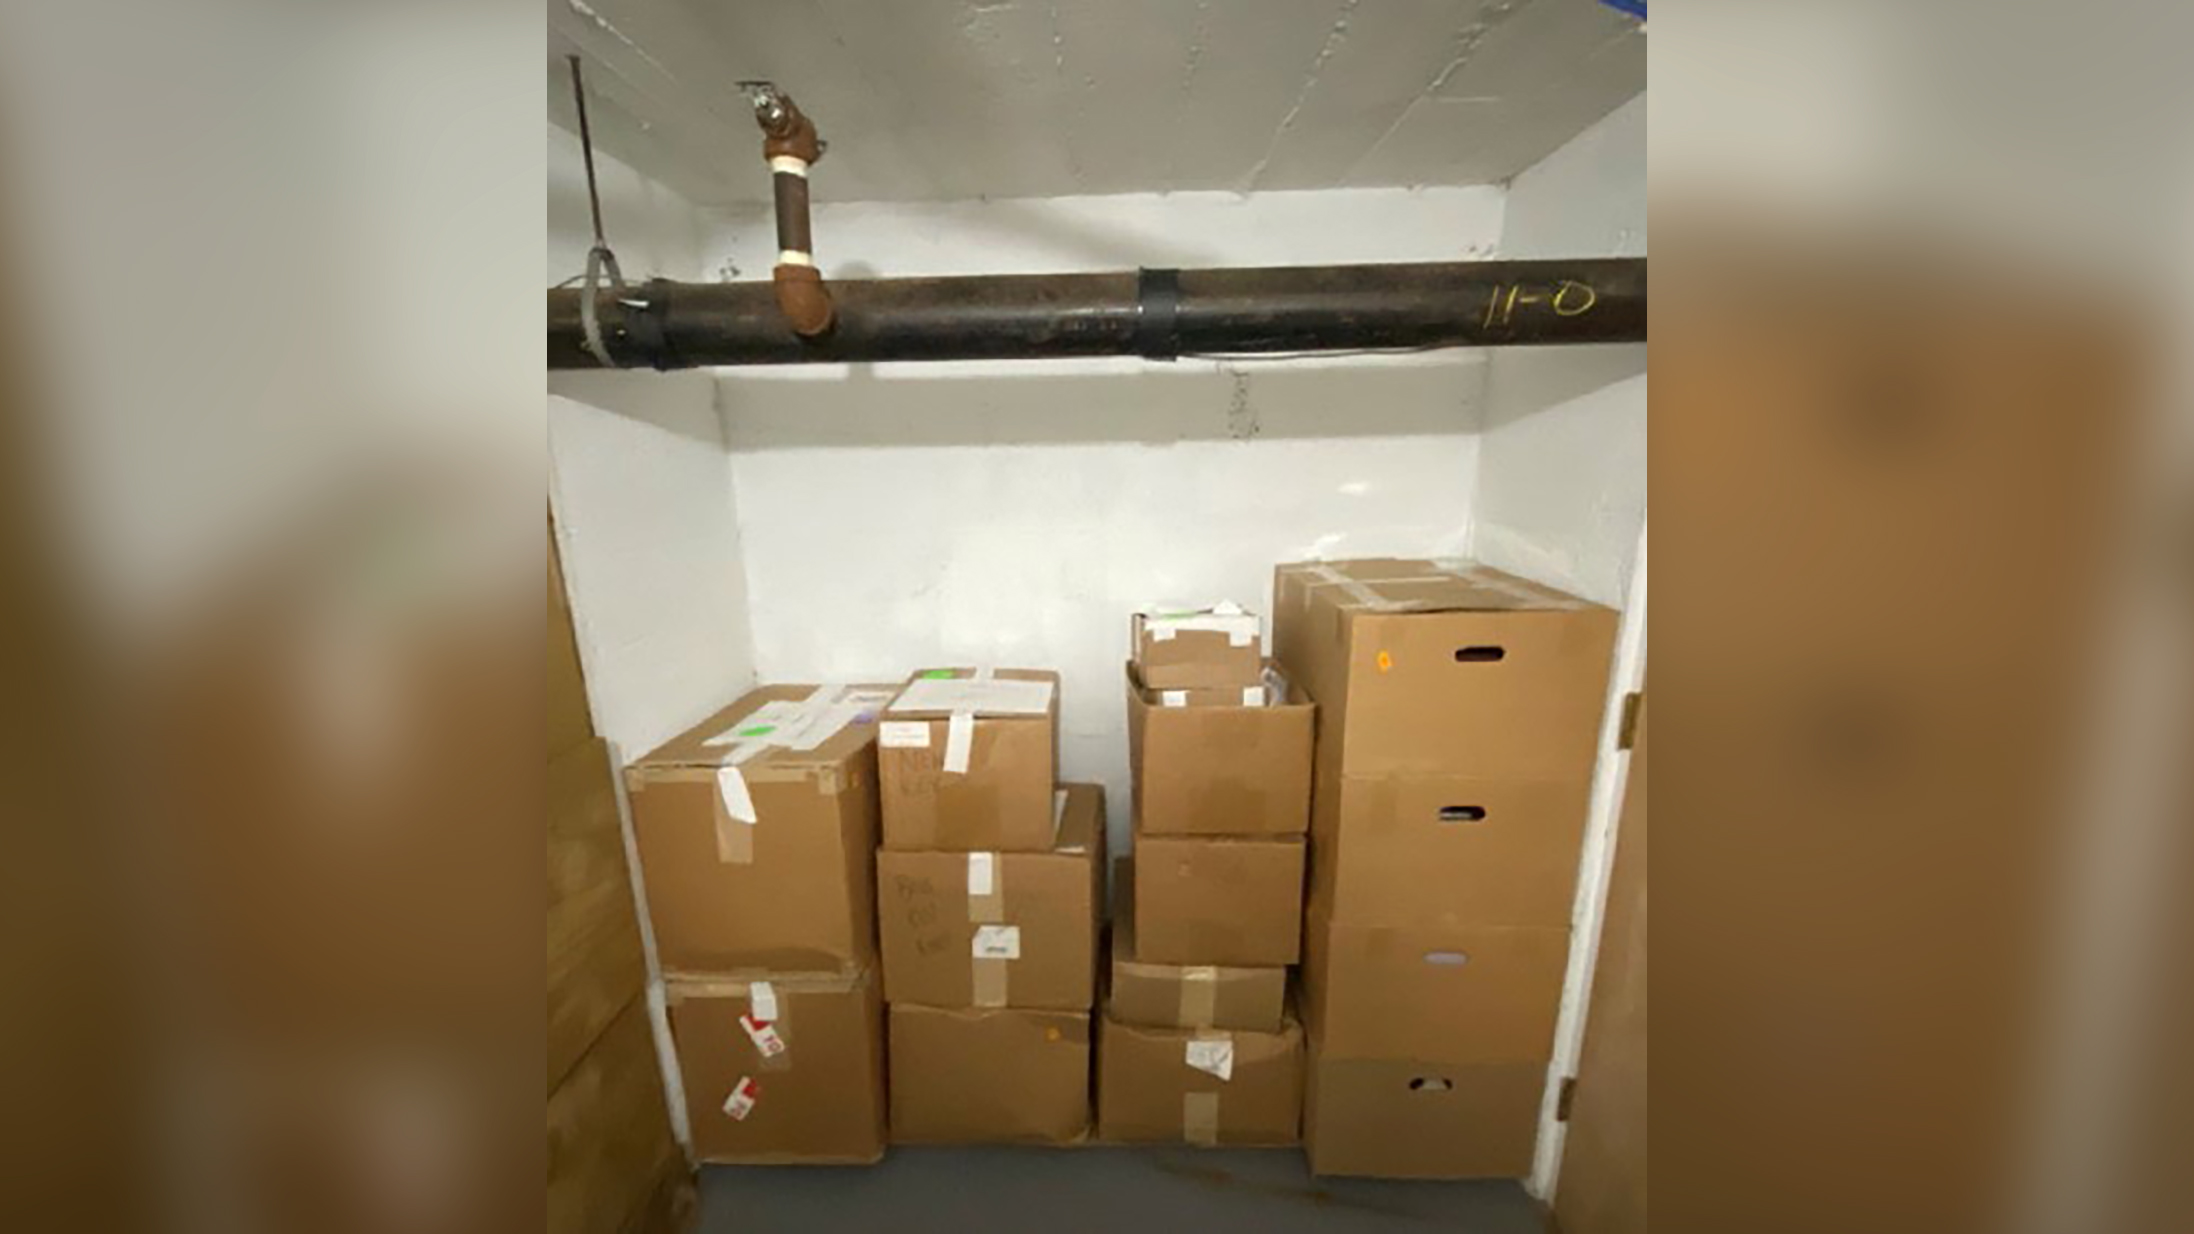 The storage room boxes were moved from the Lake Room, according to the indictment.